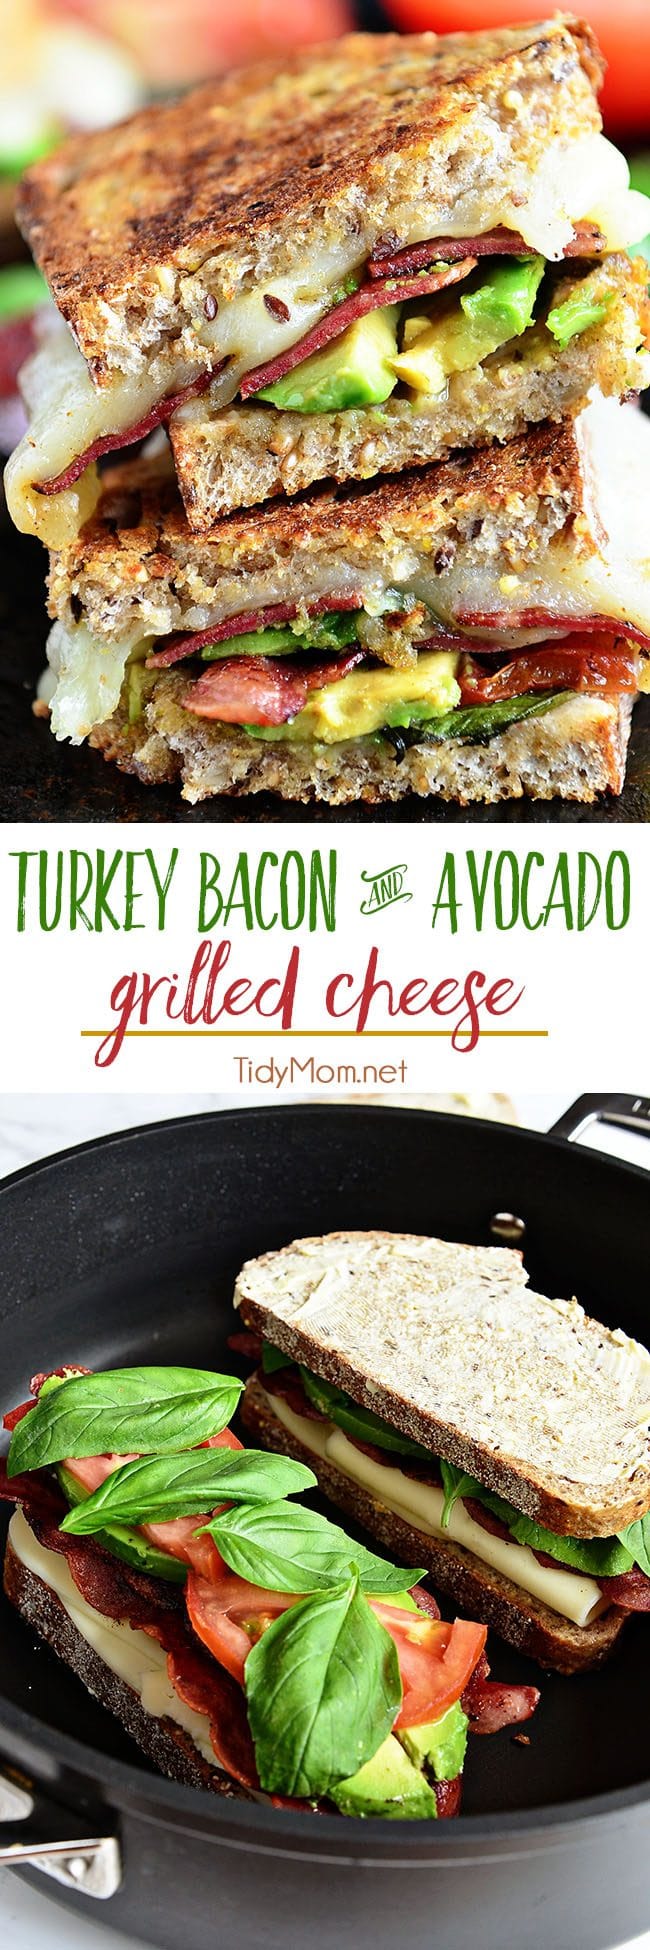 Turkey Bacon and Avocado Grilled Cheese sandwich loaded with fresh basil, tomatoes and mozzarella cheese on a hearty artisan bread. 